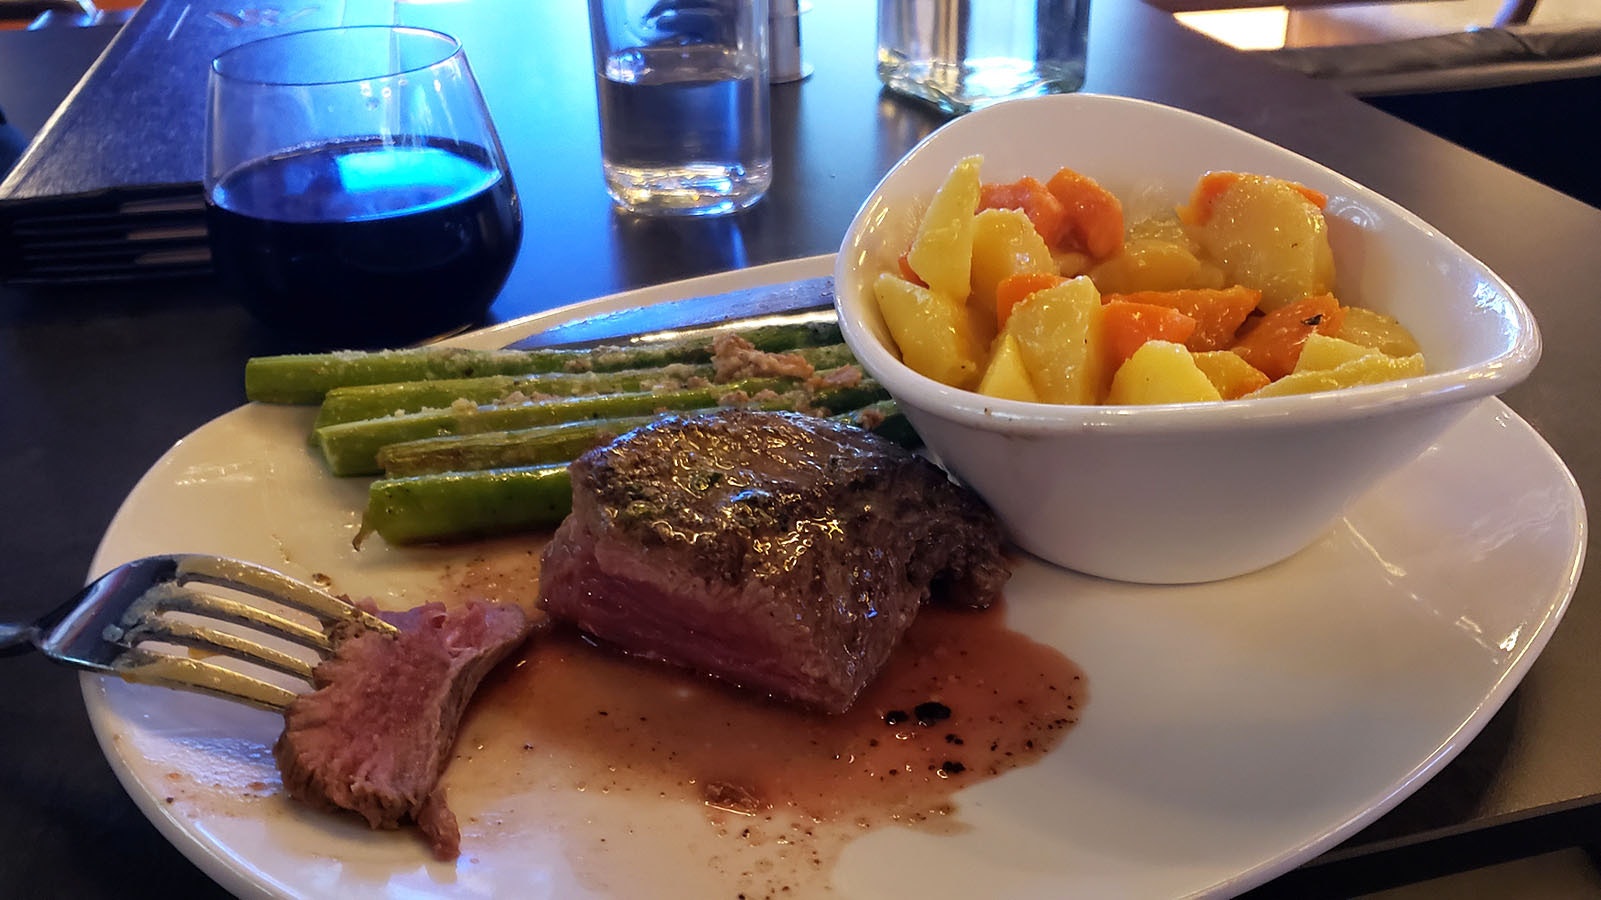 Wyoming beef perfectly prepared and very tender with asparagus and a dish of roasted turnips and carrots. A selection of good red wines are available to go with the meal.